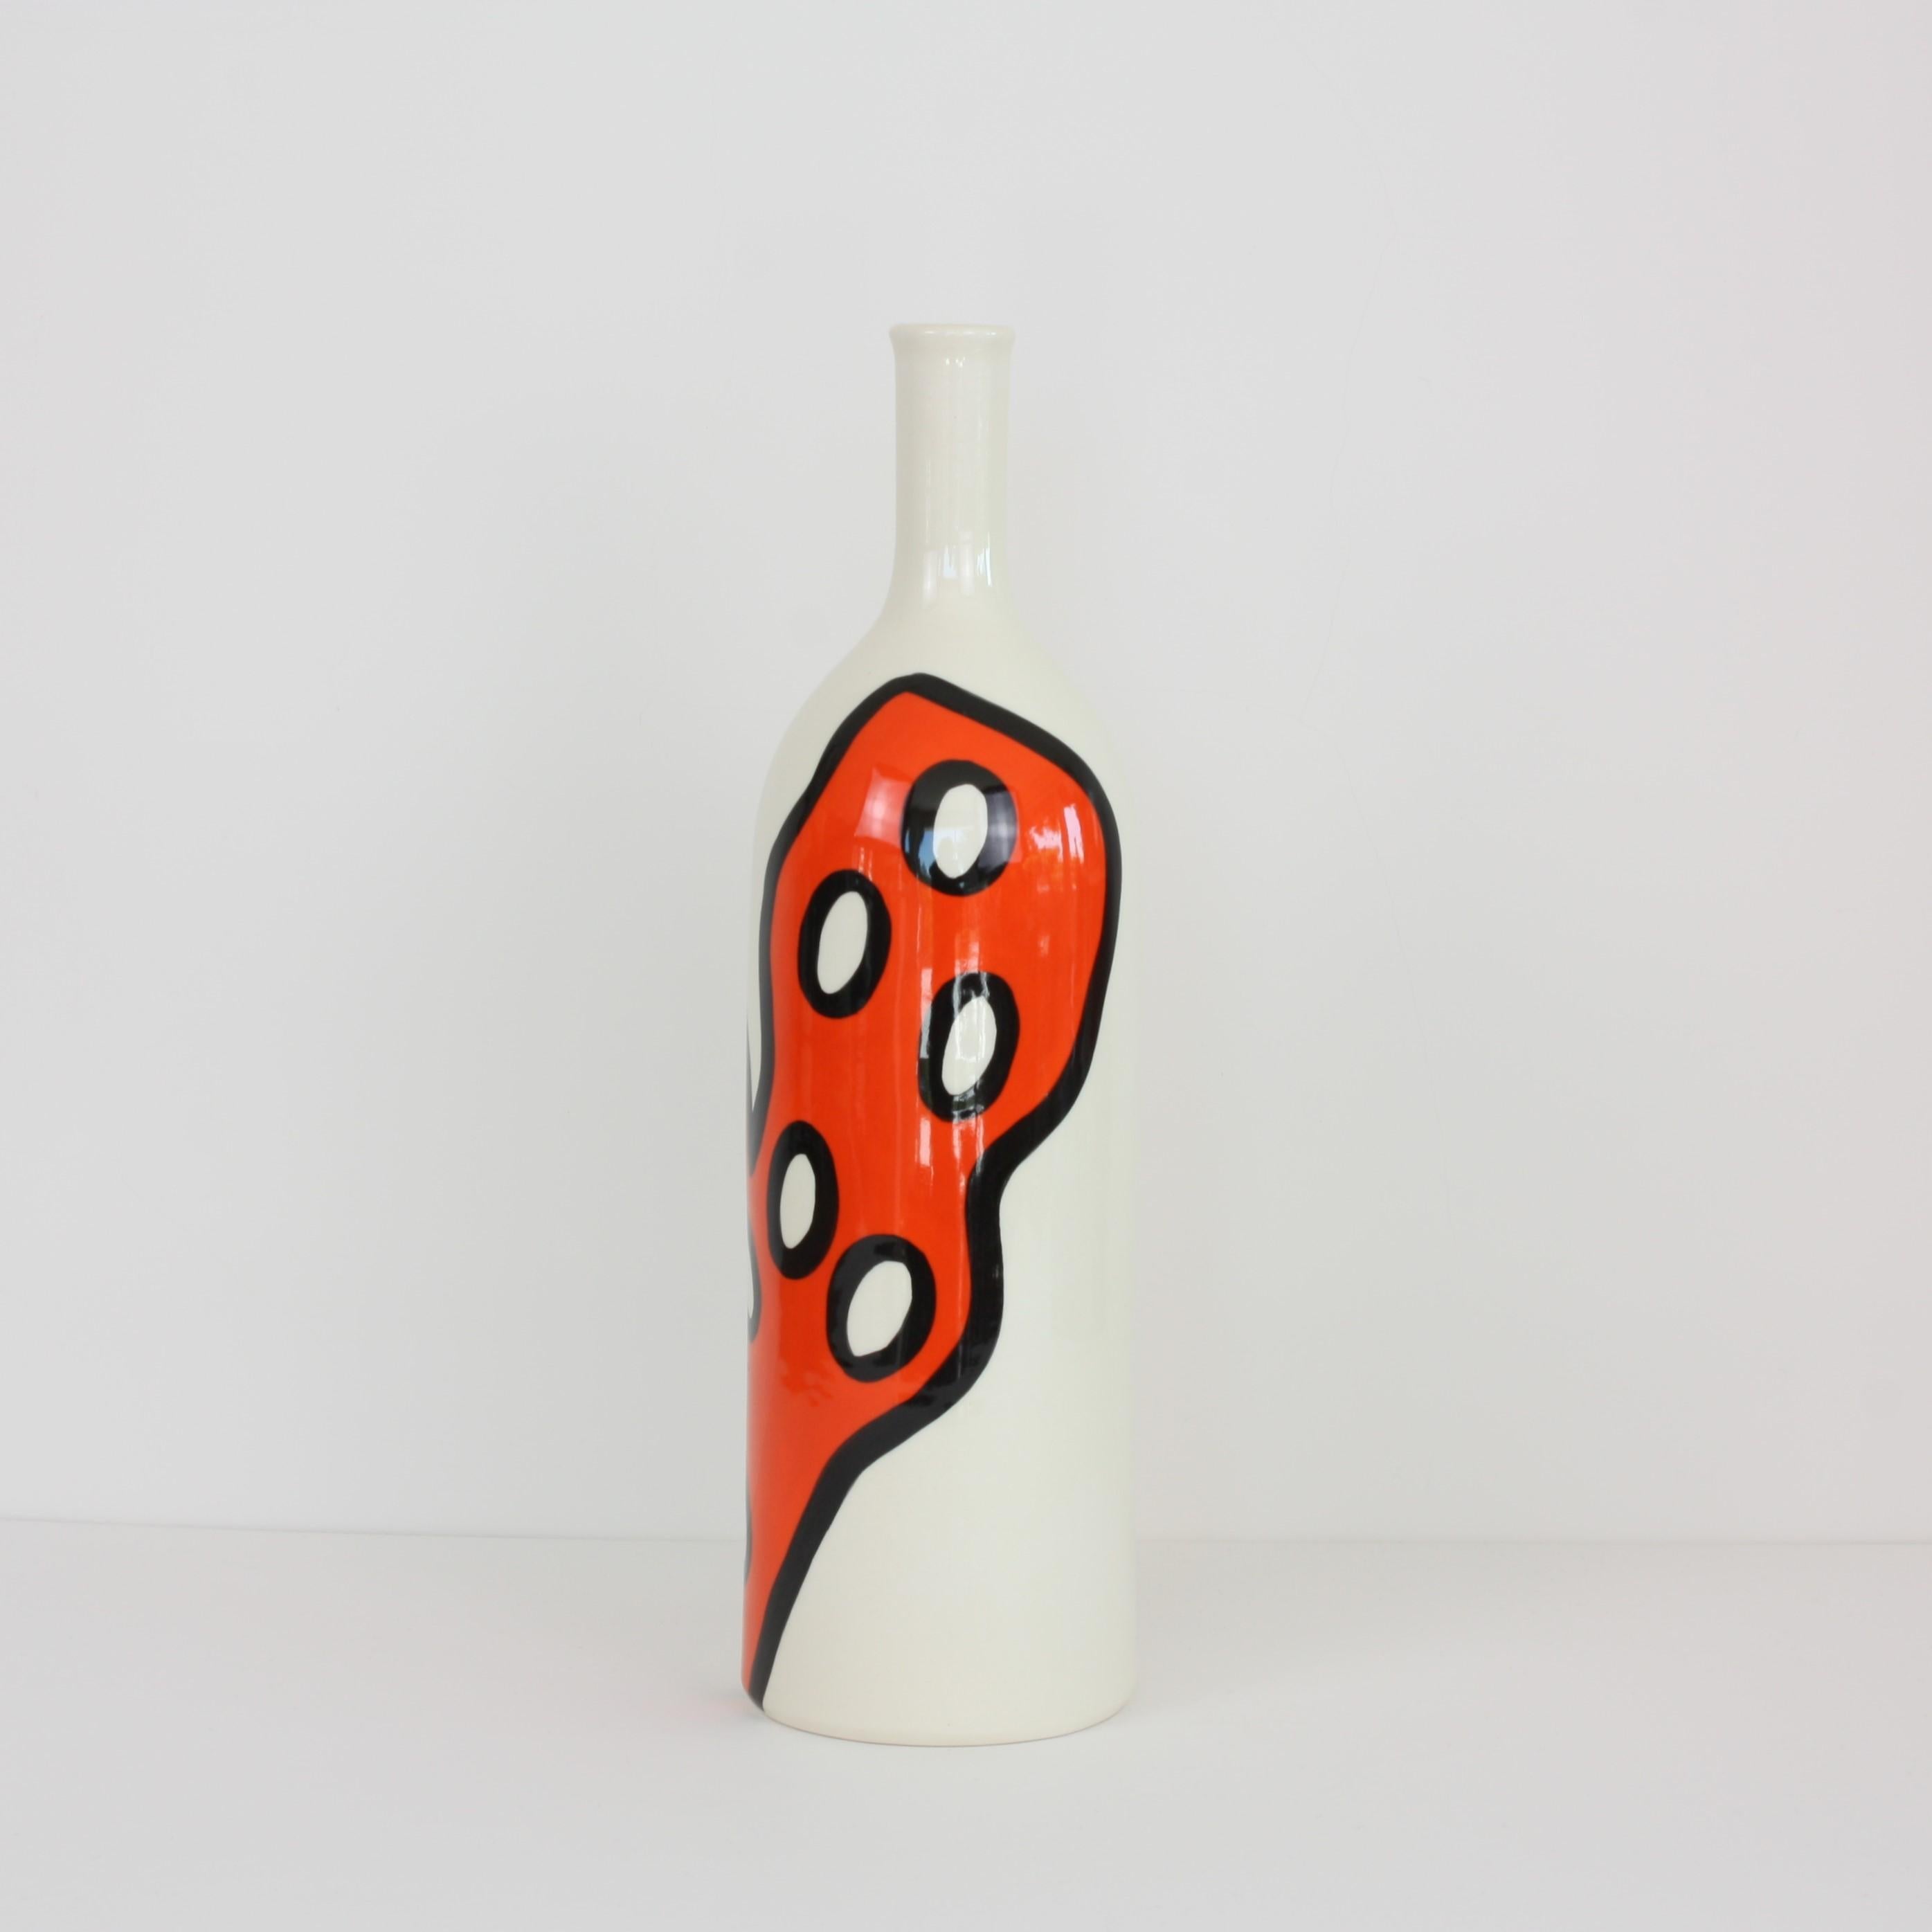 French Set of 3 Contemporary Ceramic Bottles with Nautical Motifs, Corail